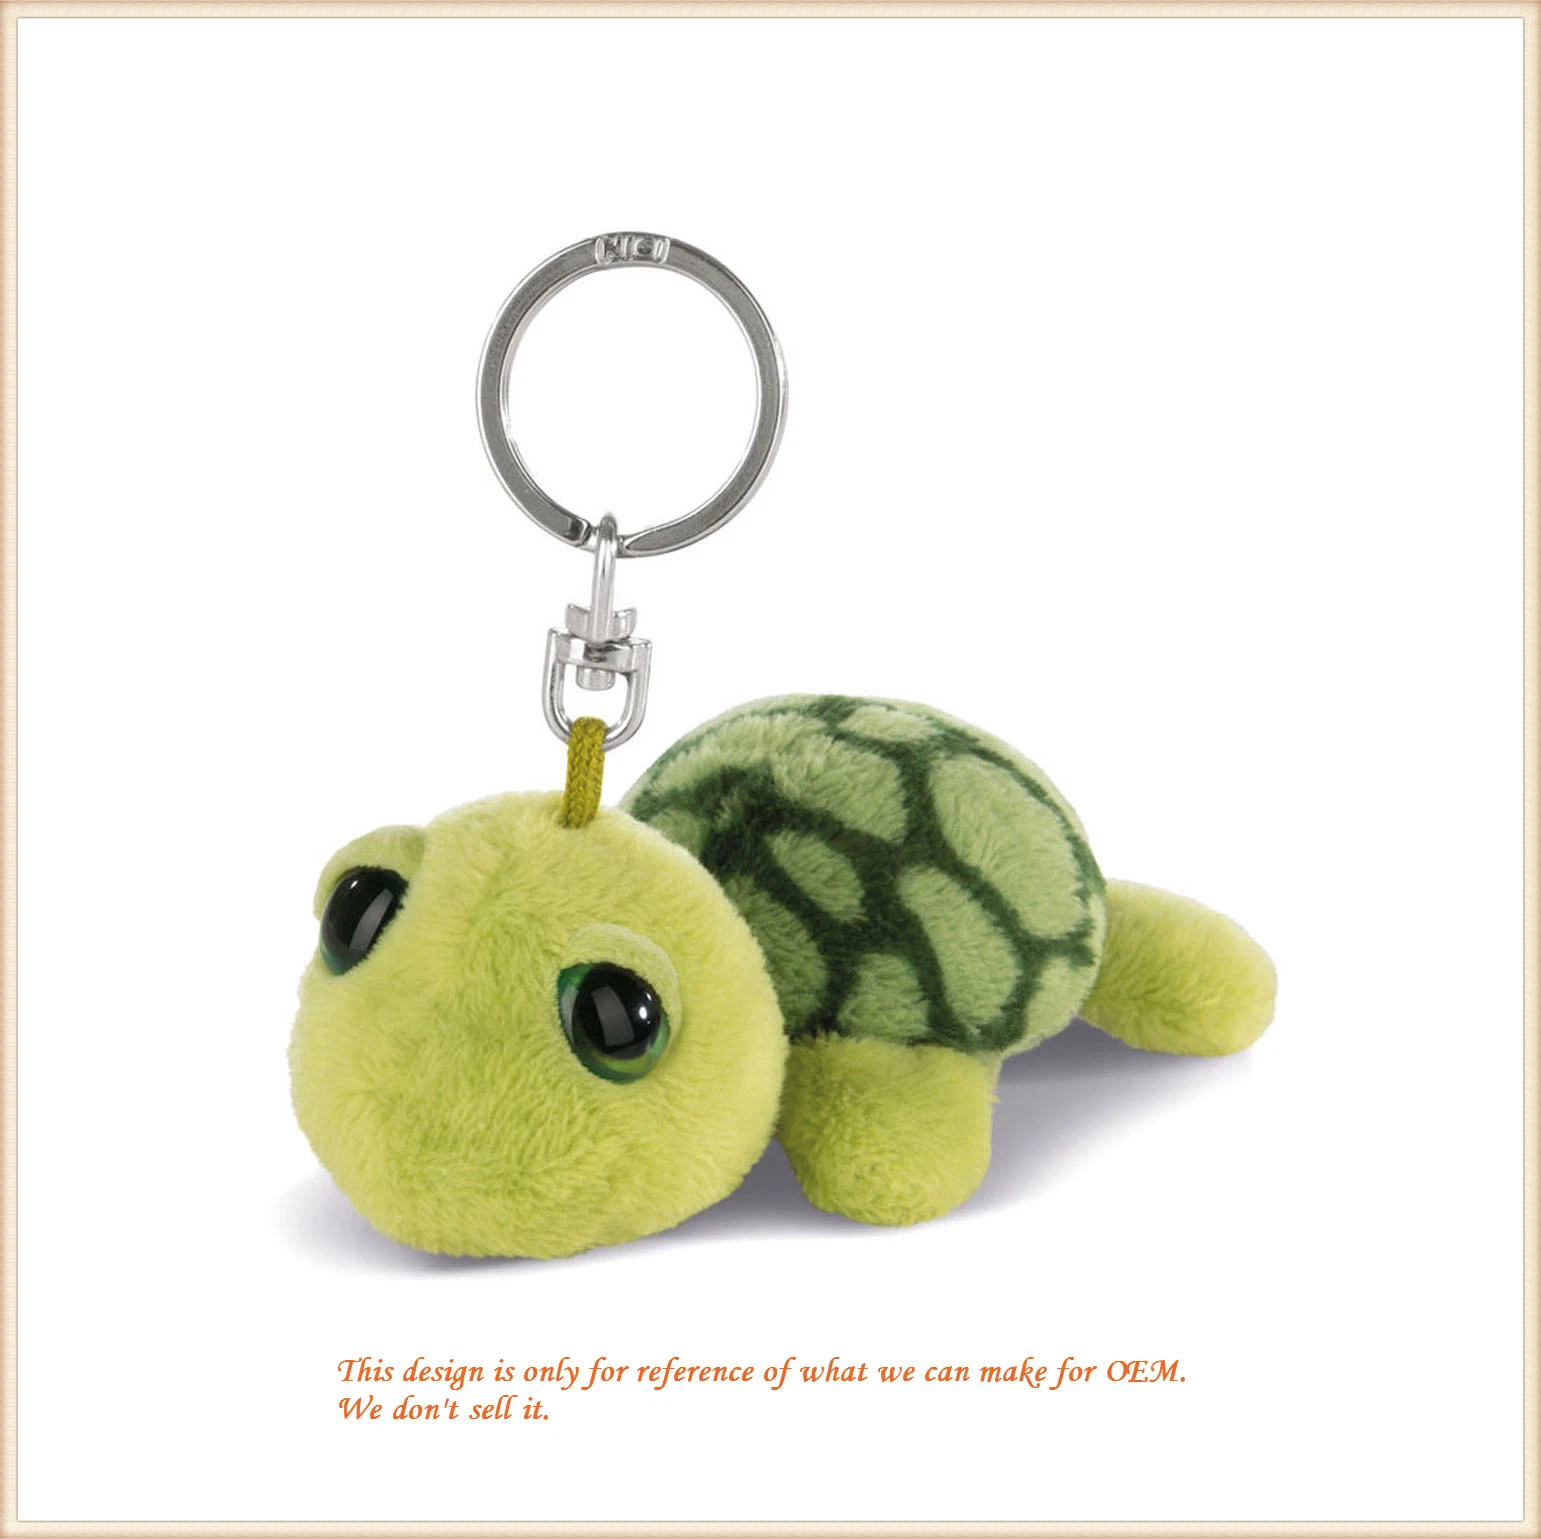 Plush Toys of Green Turtle Key Finder/ Stuffed Tortoise Toys for Wholesales/ OEM ODM Soft Toys